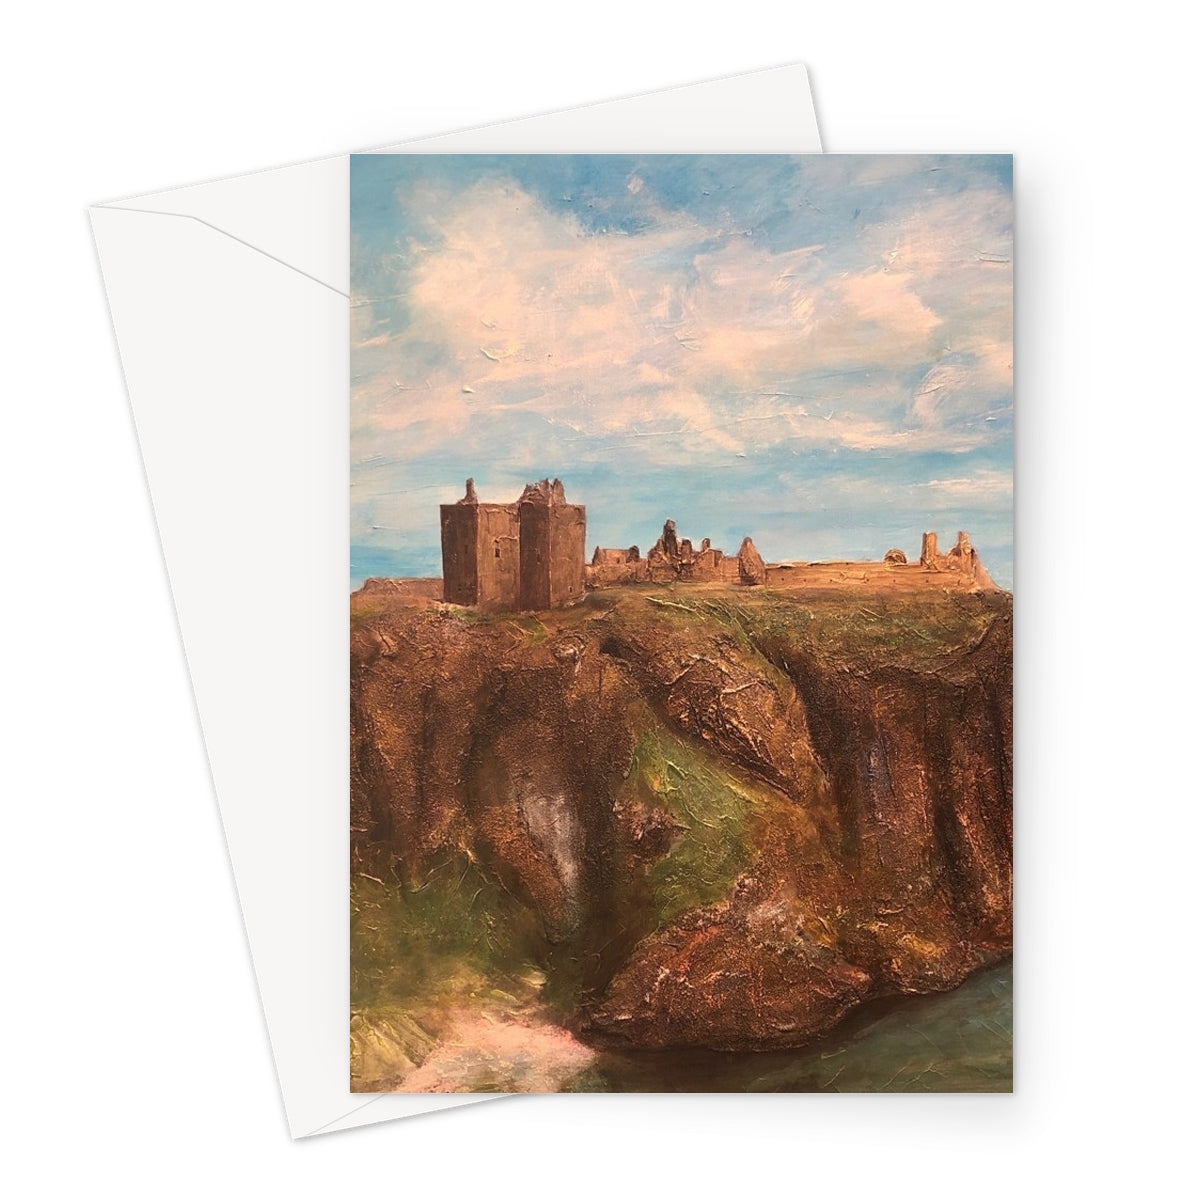 Dunnottar Castle Art Gifts Greeting Card-Stationery-Prodigi-A5 Portrait-1 Card-Paintings, Prints, Homeware, Art Gifts From Scotland By Scottish Artist Kevin Hunter